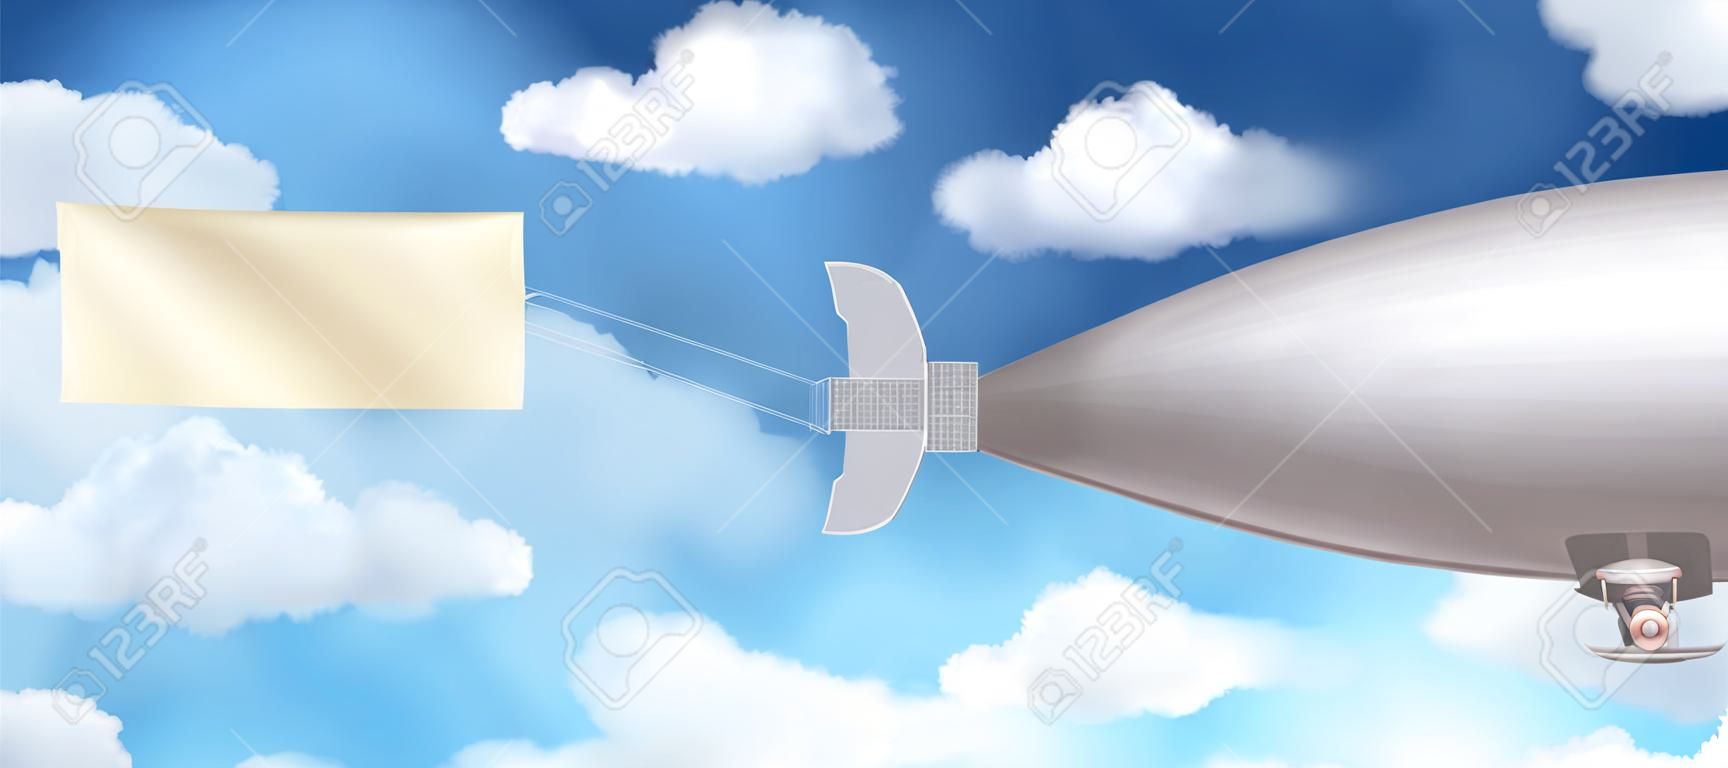 Dirigible airship realistic composition with banner and clouds in the sky vector illustration